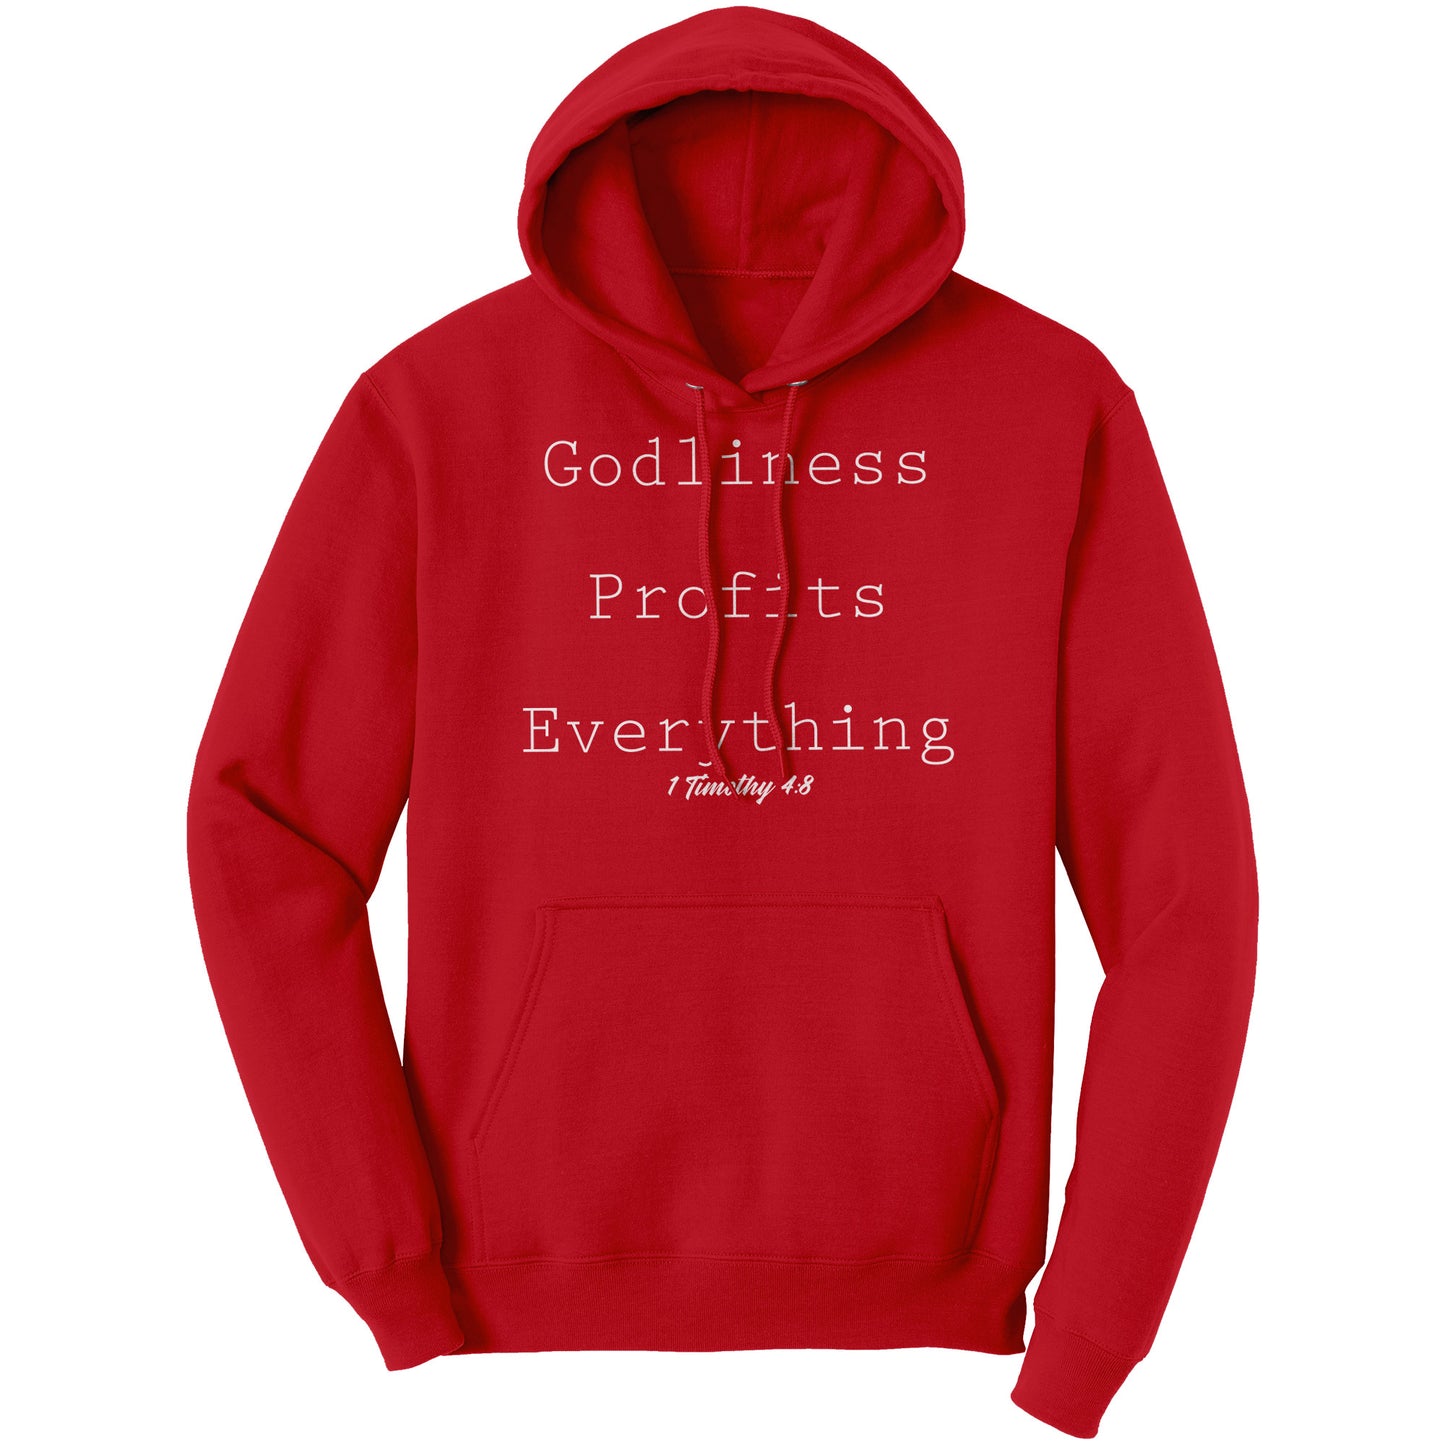 Godliness Profits Everything 1 Timothy 4:8 Hoodie Part 2